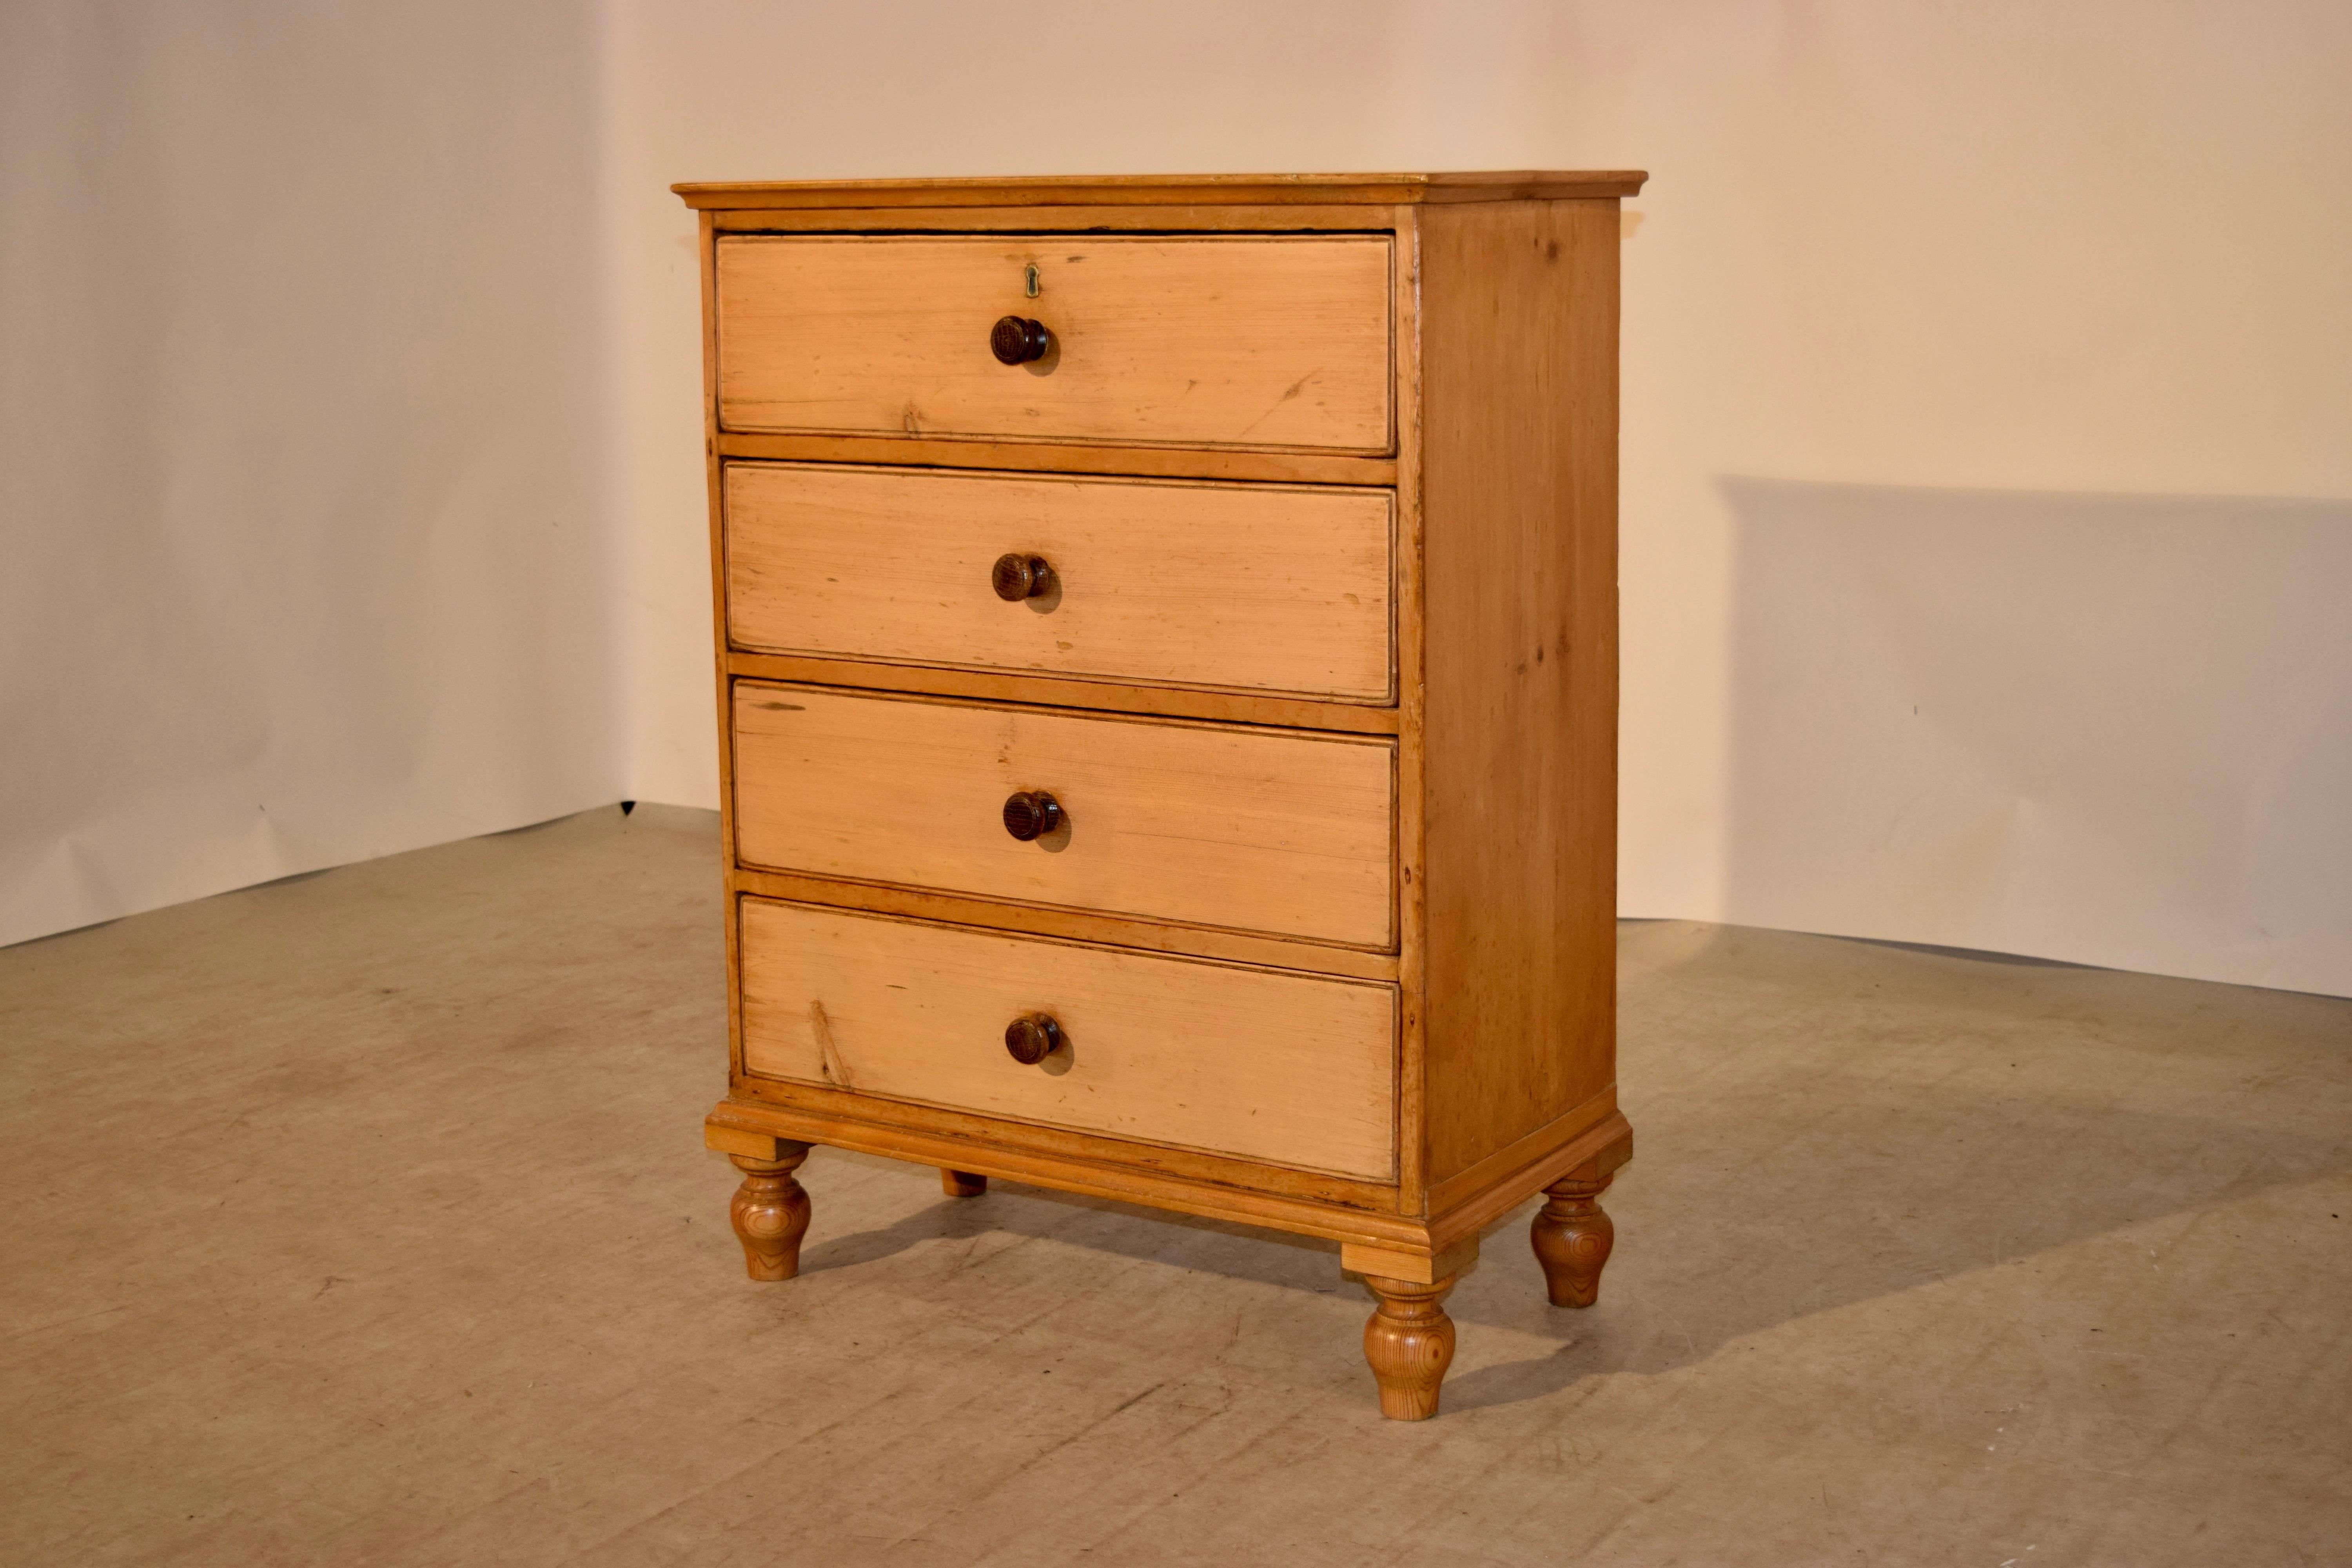 19th century small pine chest from England. The top is a single plank, which is banded, and follows down to four drawers and simple sides. Supported on hand-turned feet.